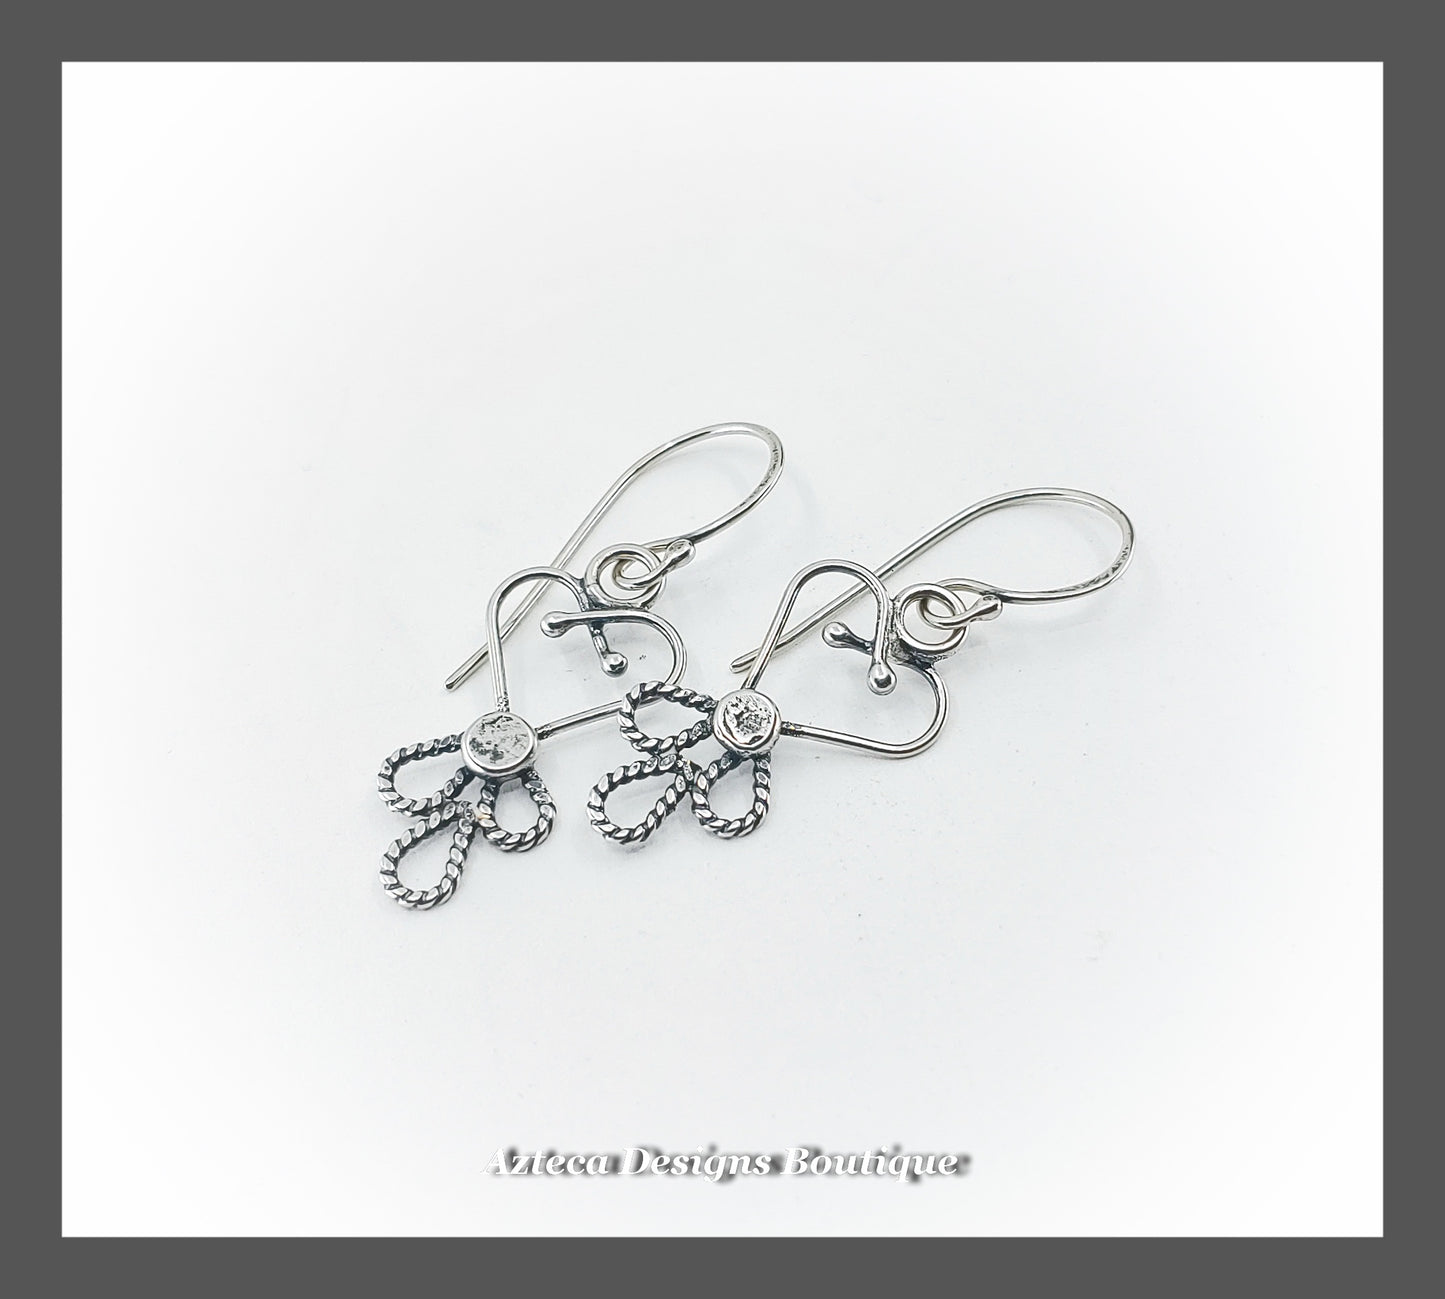 Blooming Hearts + Hand Fabricated Argentium Silver Earrings